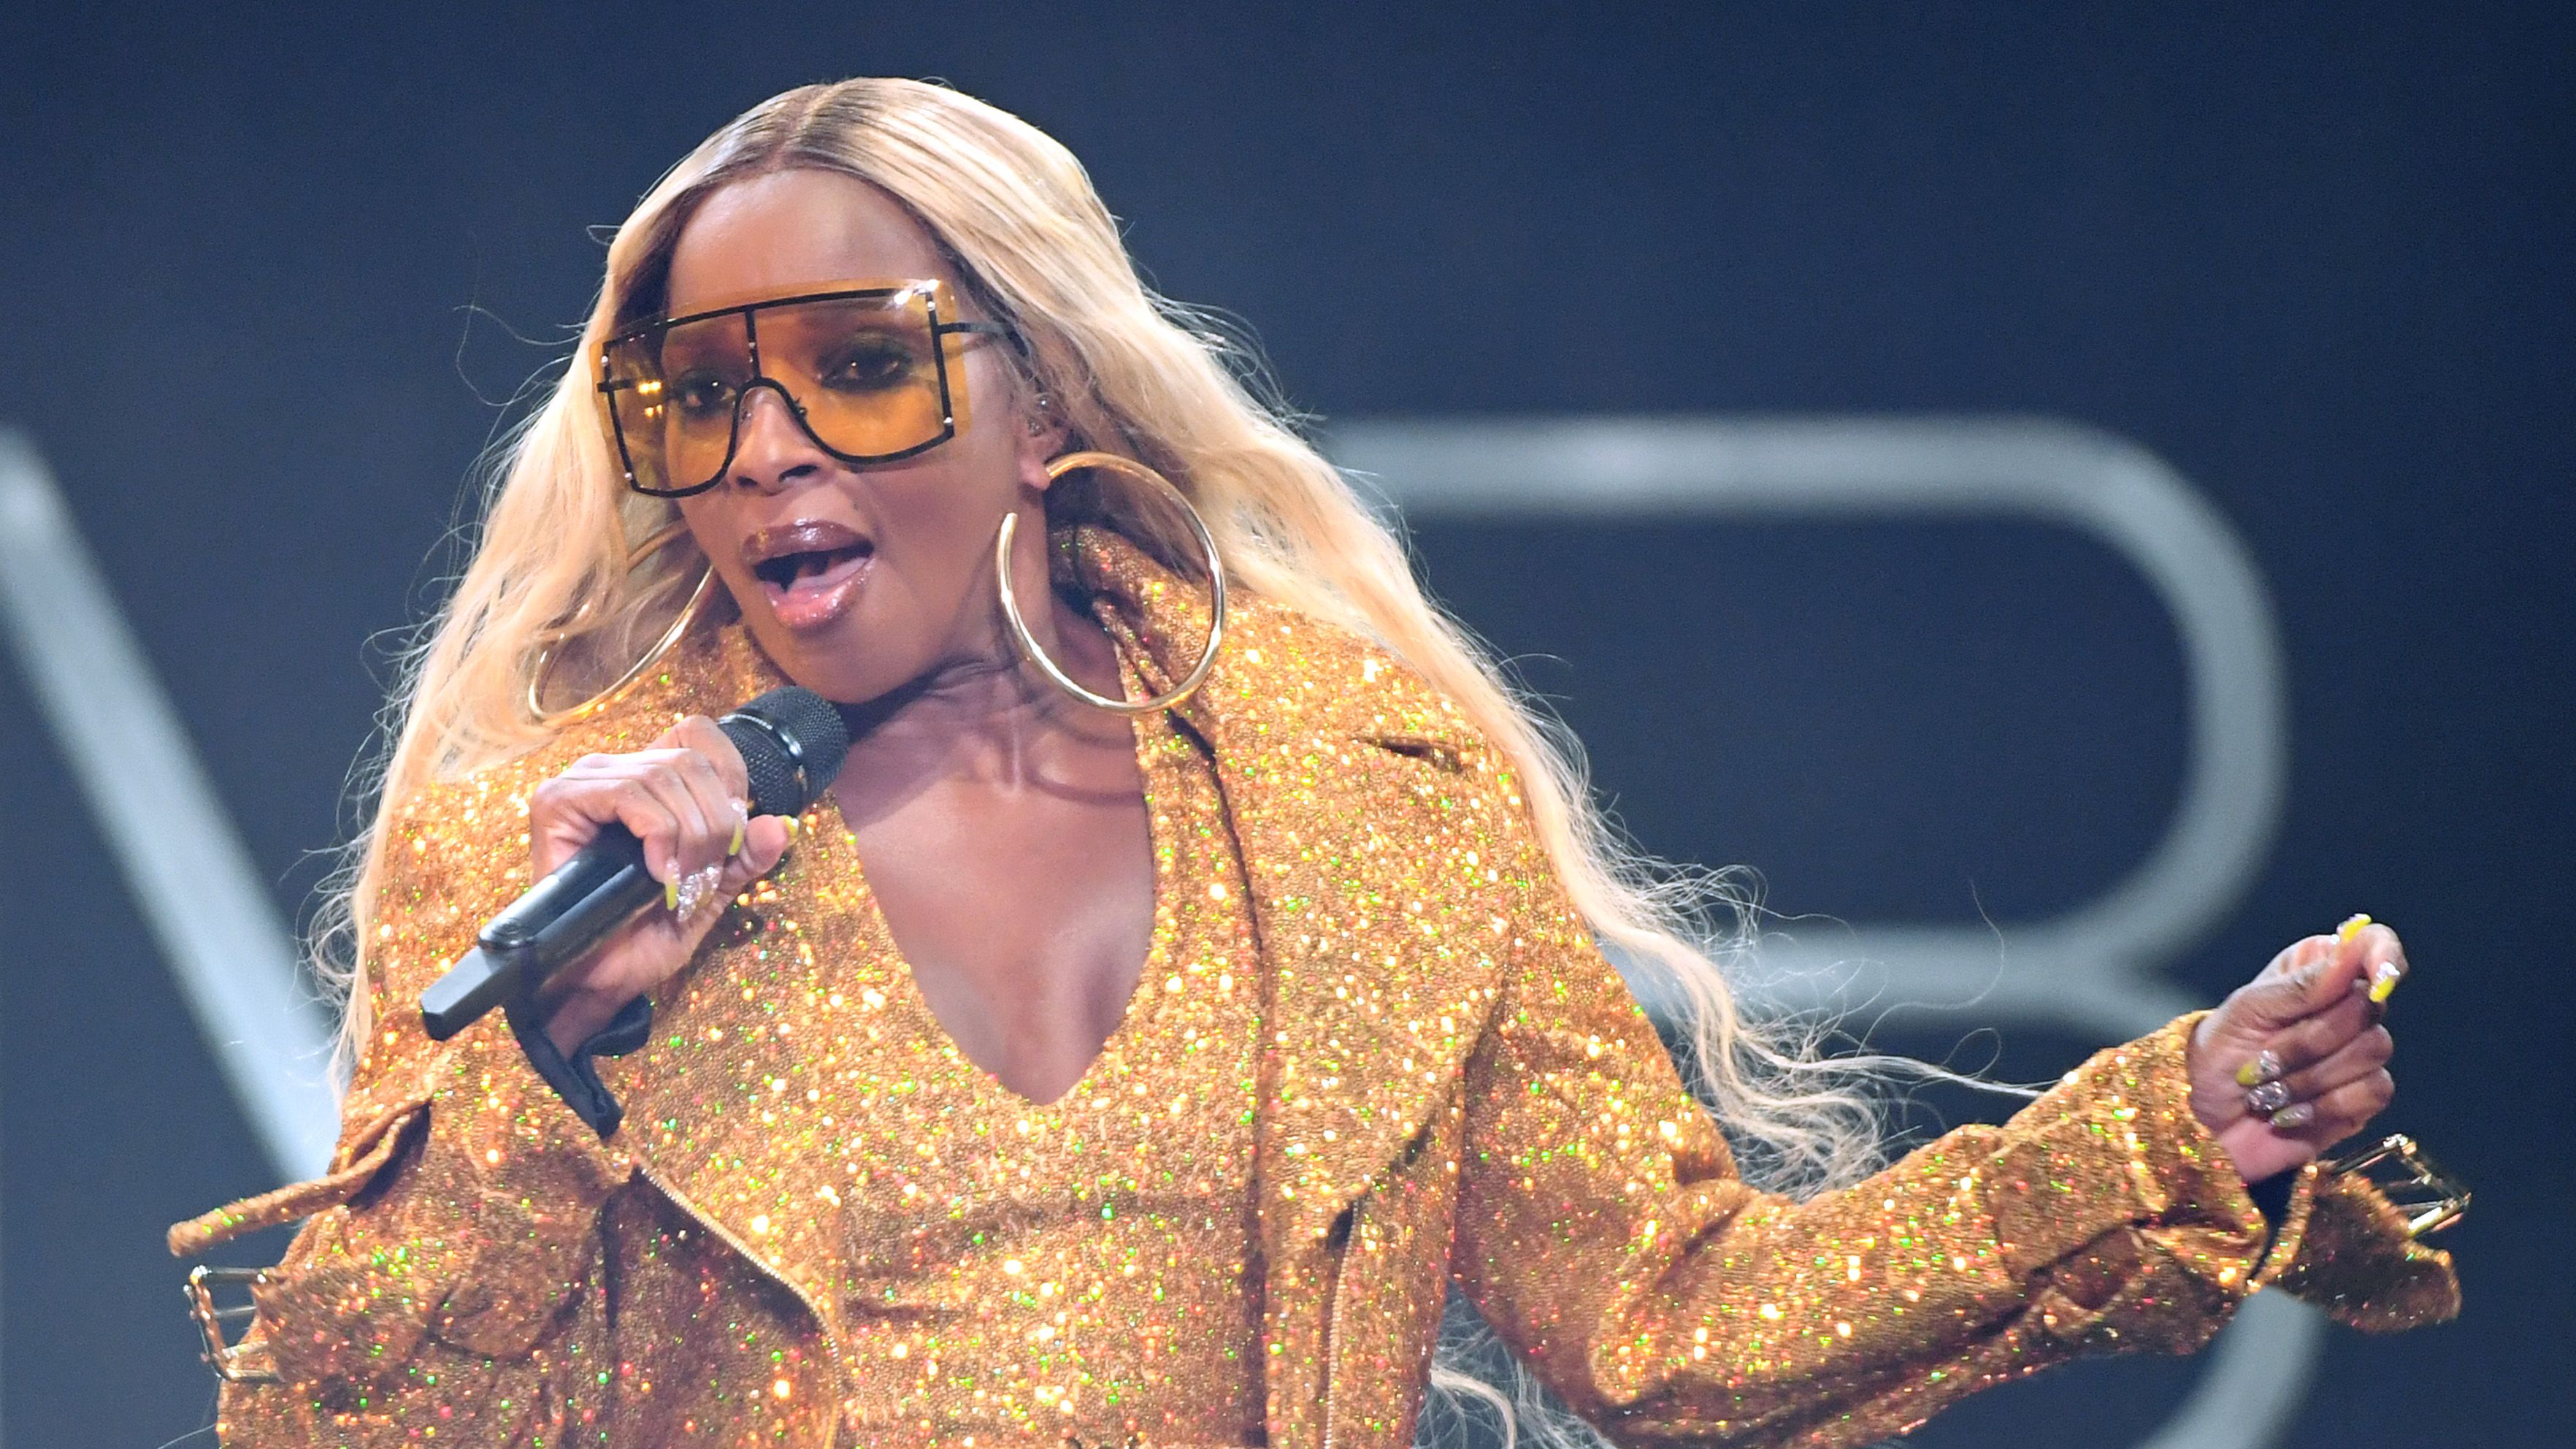 Mary J. Blige at Super Bowl Halftime: What Song Should She Play